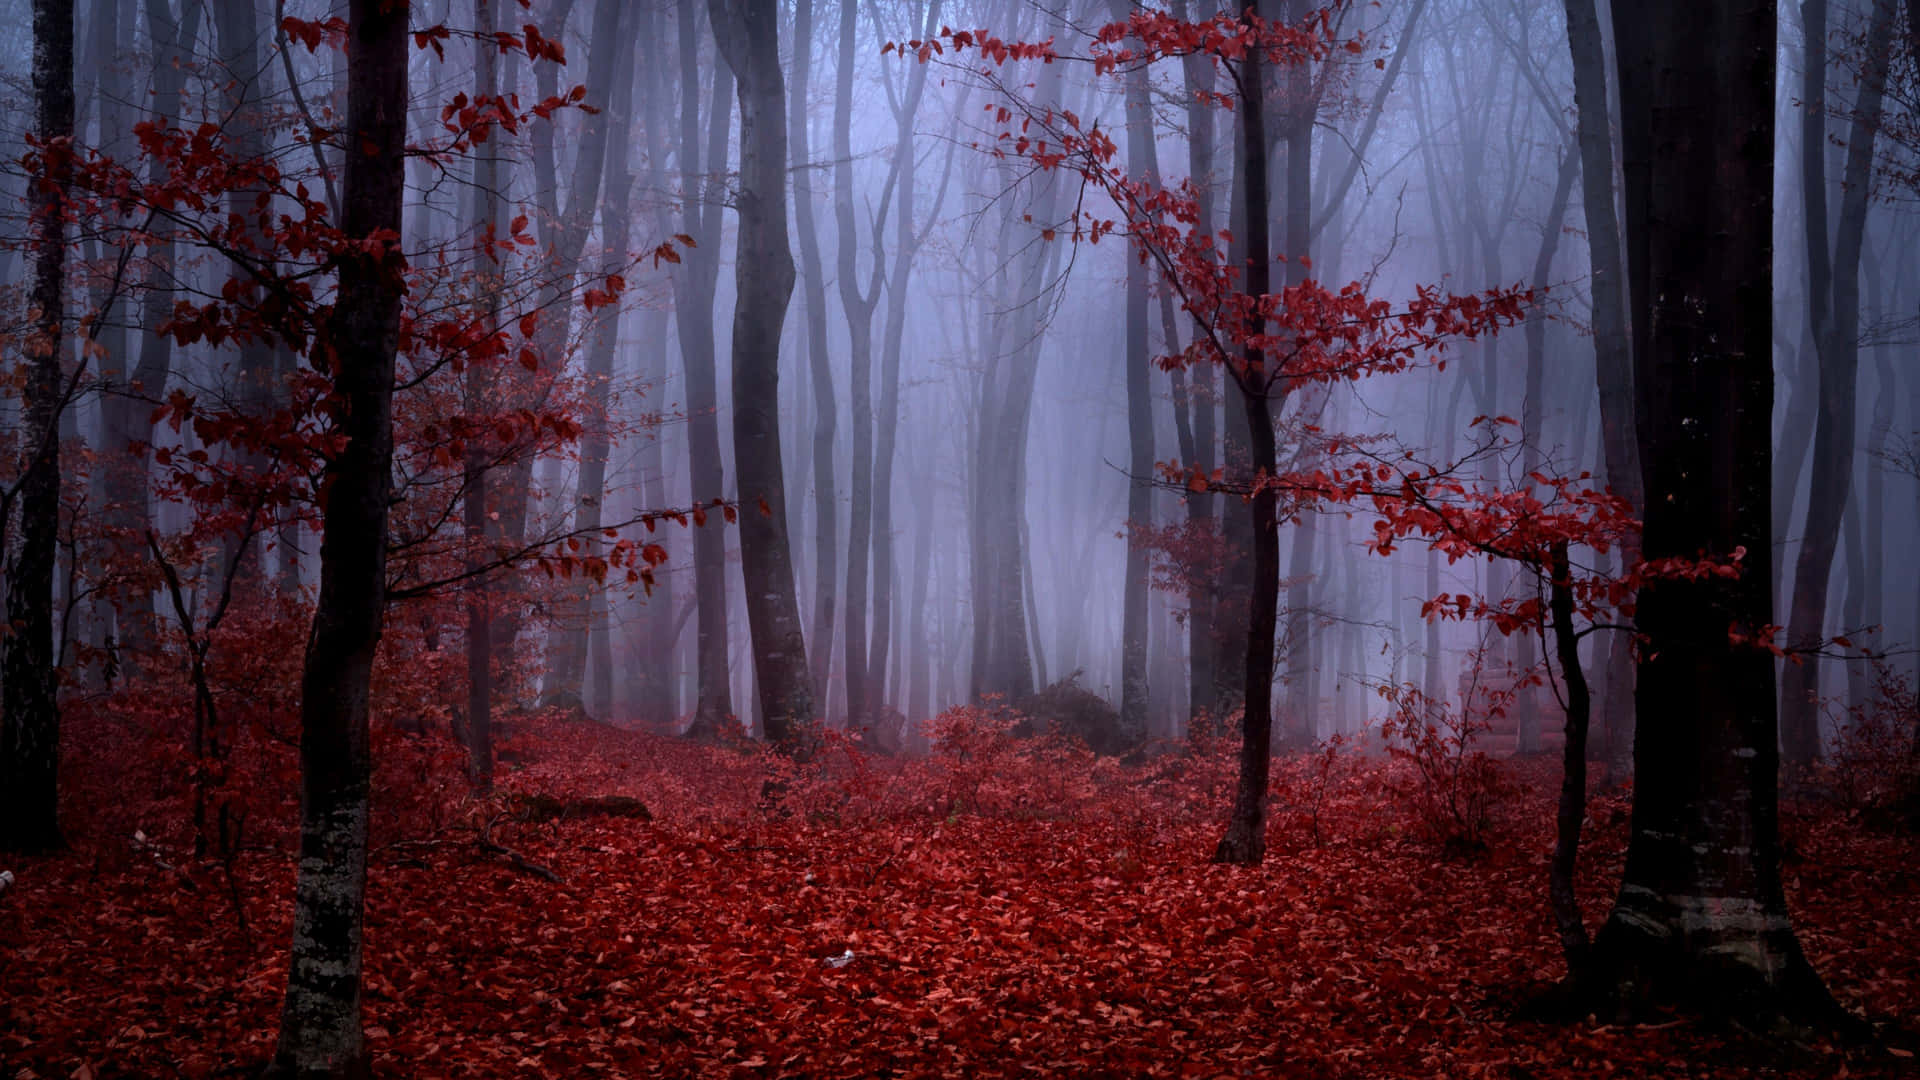 Take a walk through this vibrant Red Forest Wallpaper